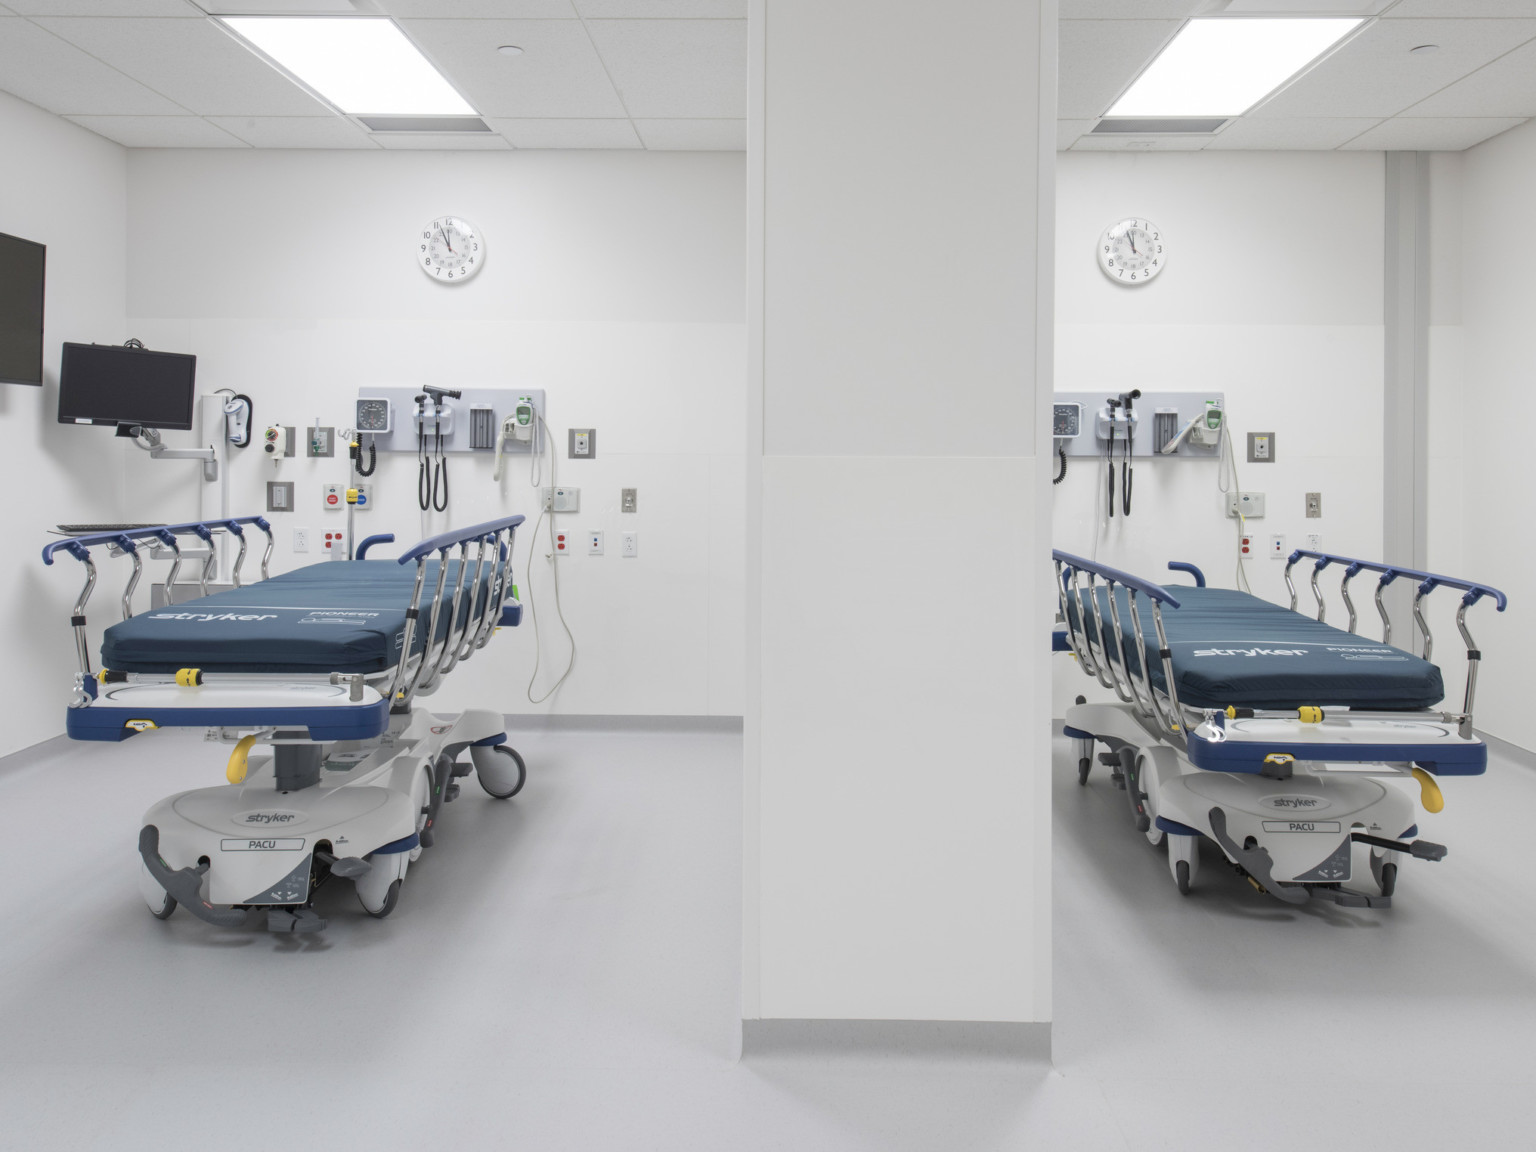 Two hospital beds reclined in a white room with a pillar. Equipment of vitals hangs on wall above each, with a clock on top